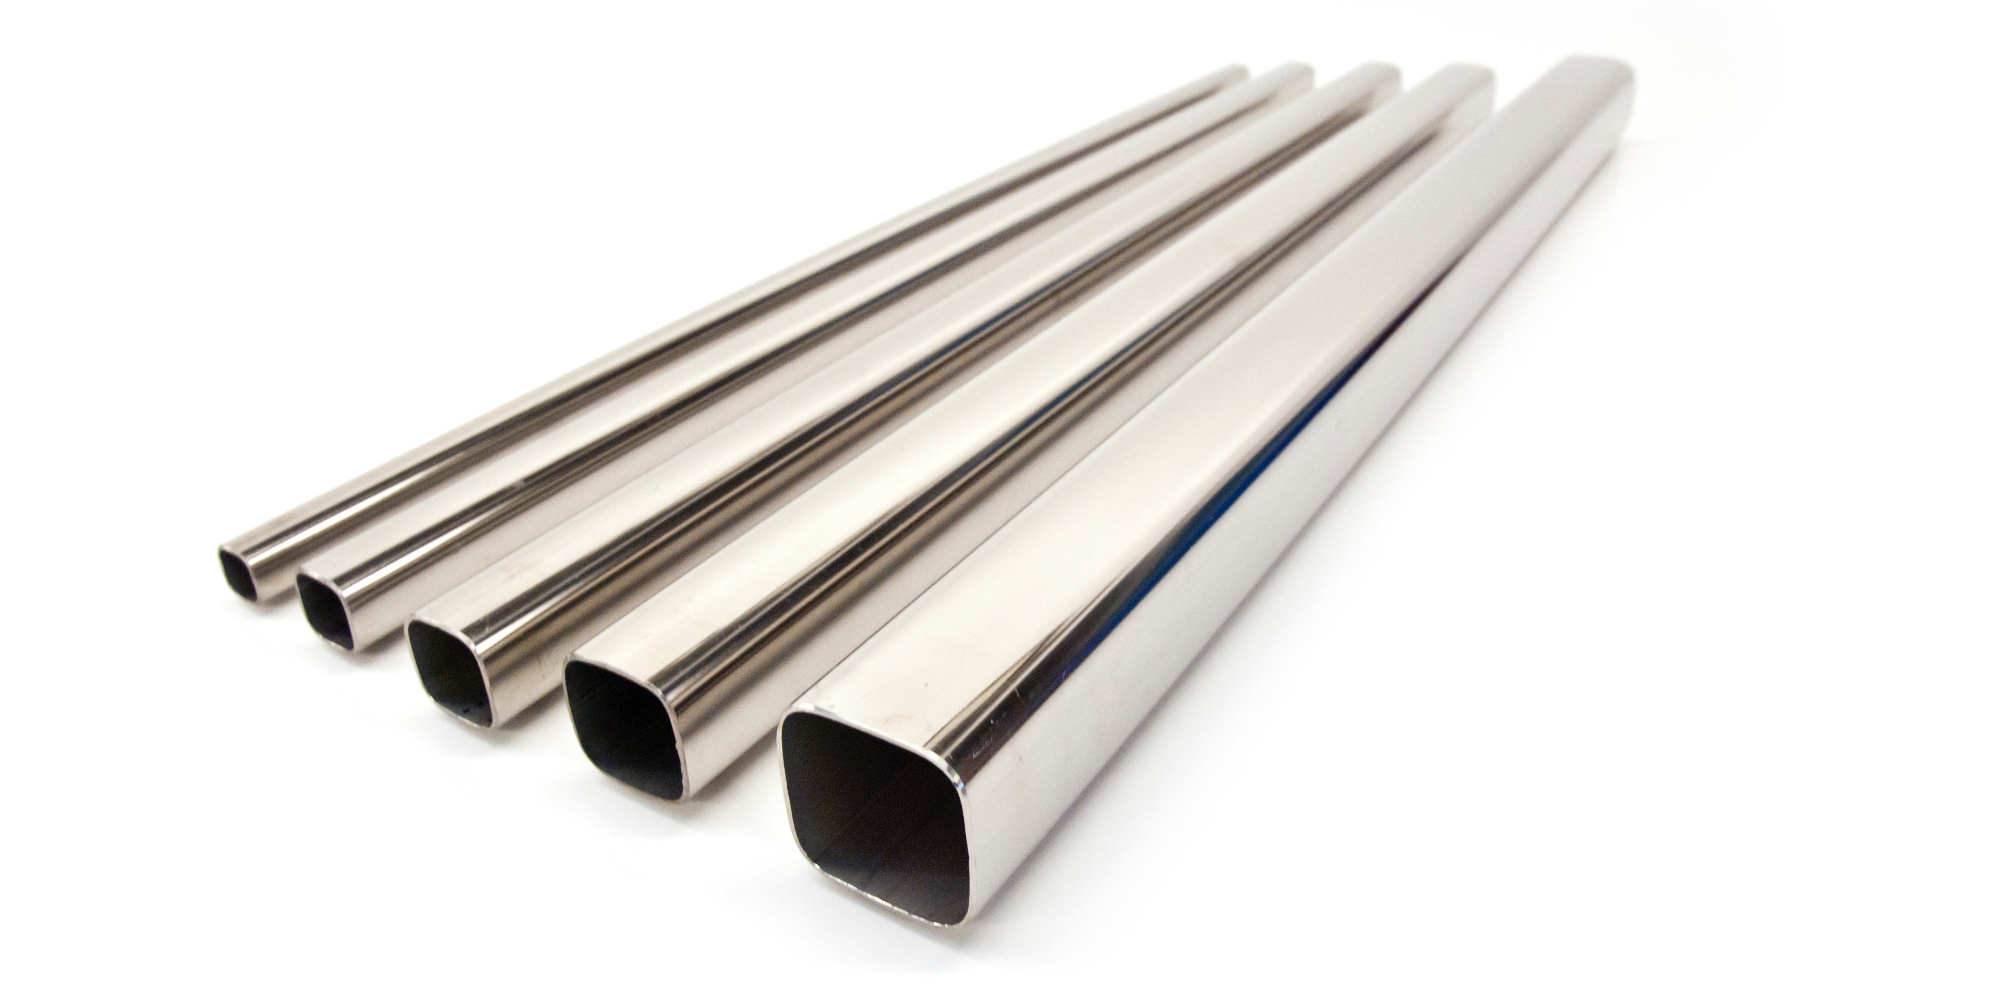 Factory Wholesale high quality tube stainless steel price 50*50mm 0.80mm thickness ASTM ERW welded stainless tube